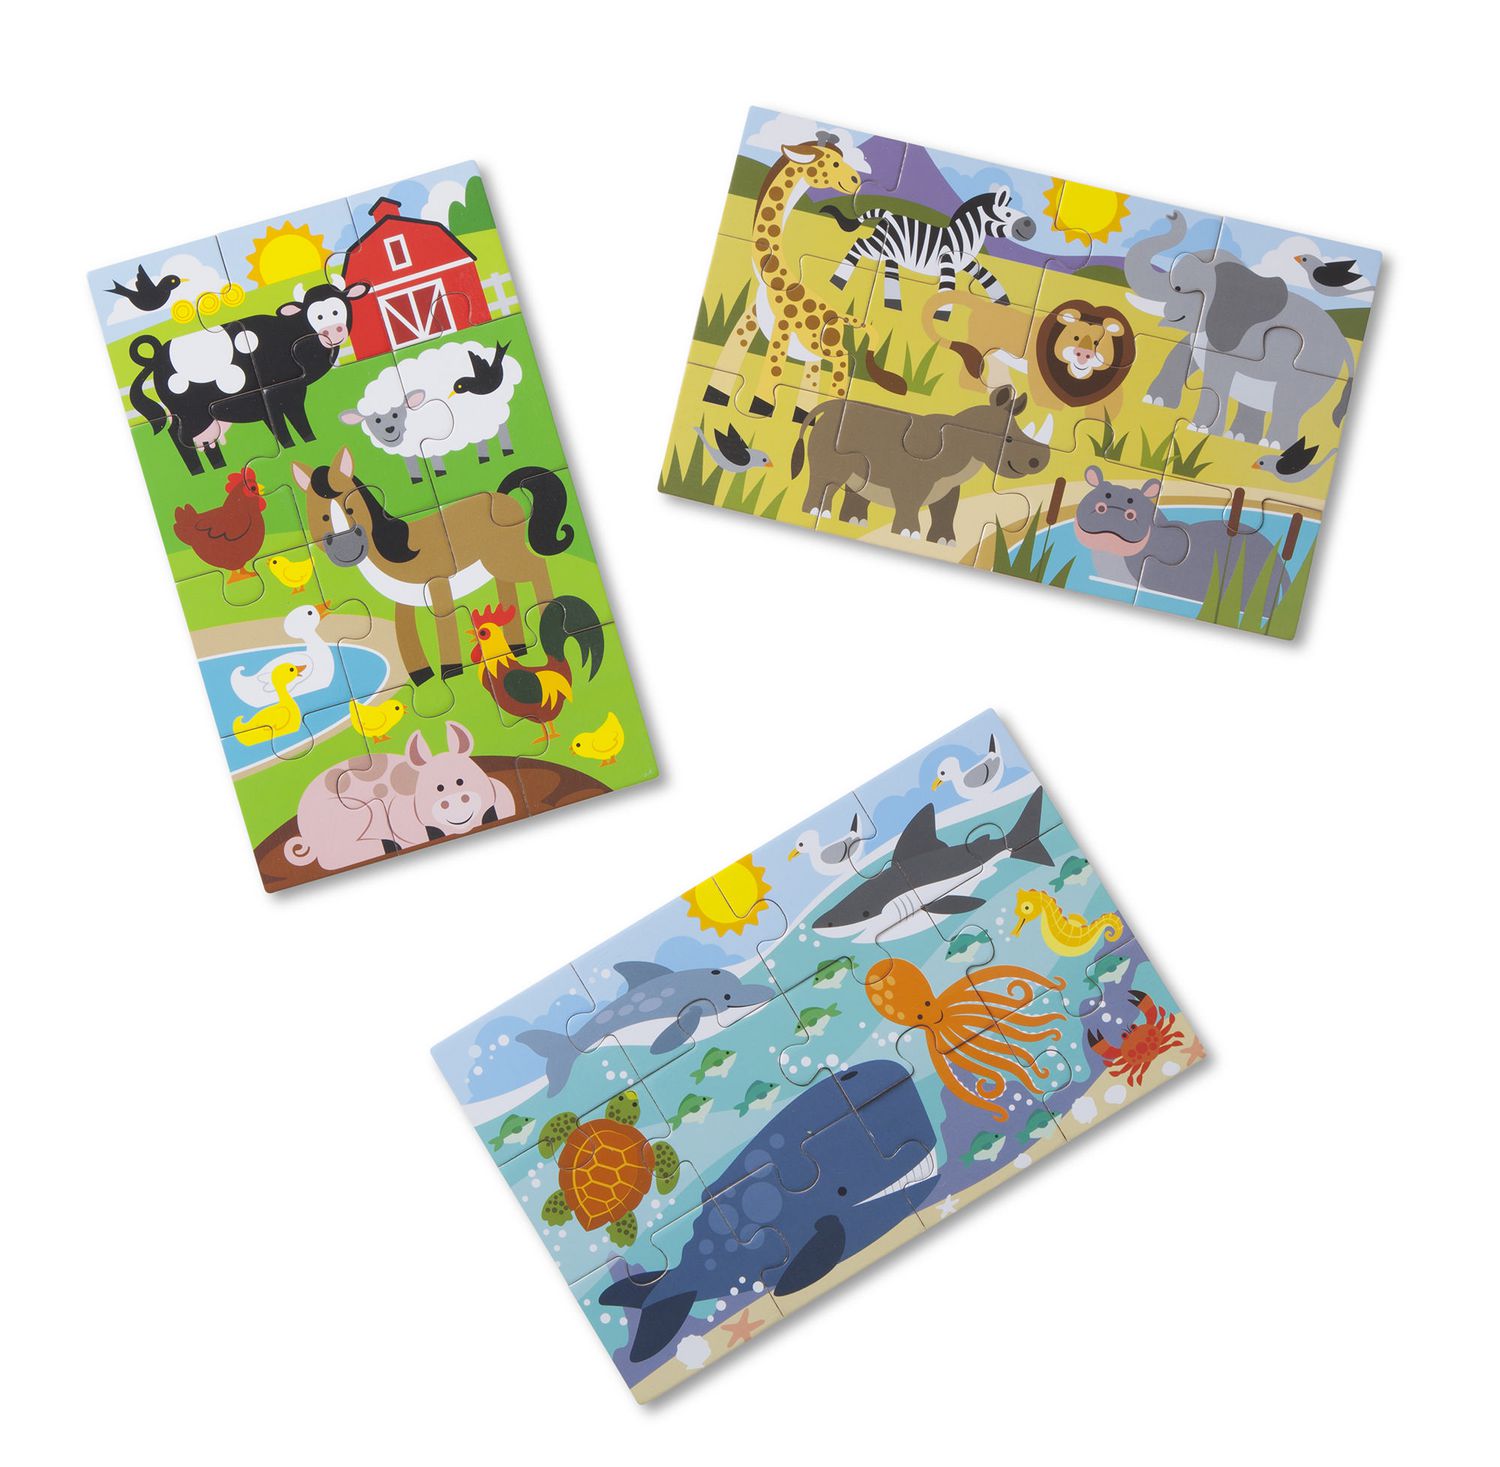 Melissa & Doug Amazing Animals Wooden Jigsaw Puzzles in a Box - 3 puzzles,  12 pcs each